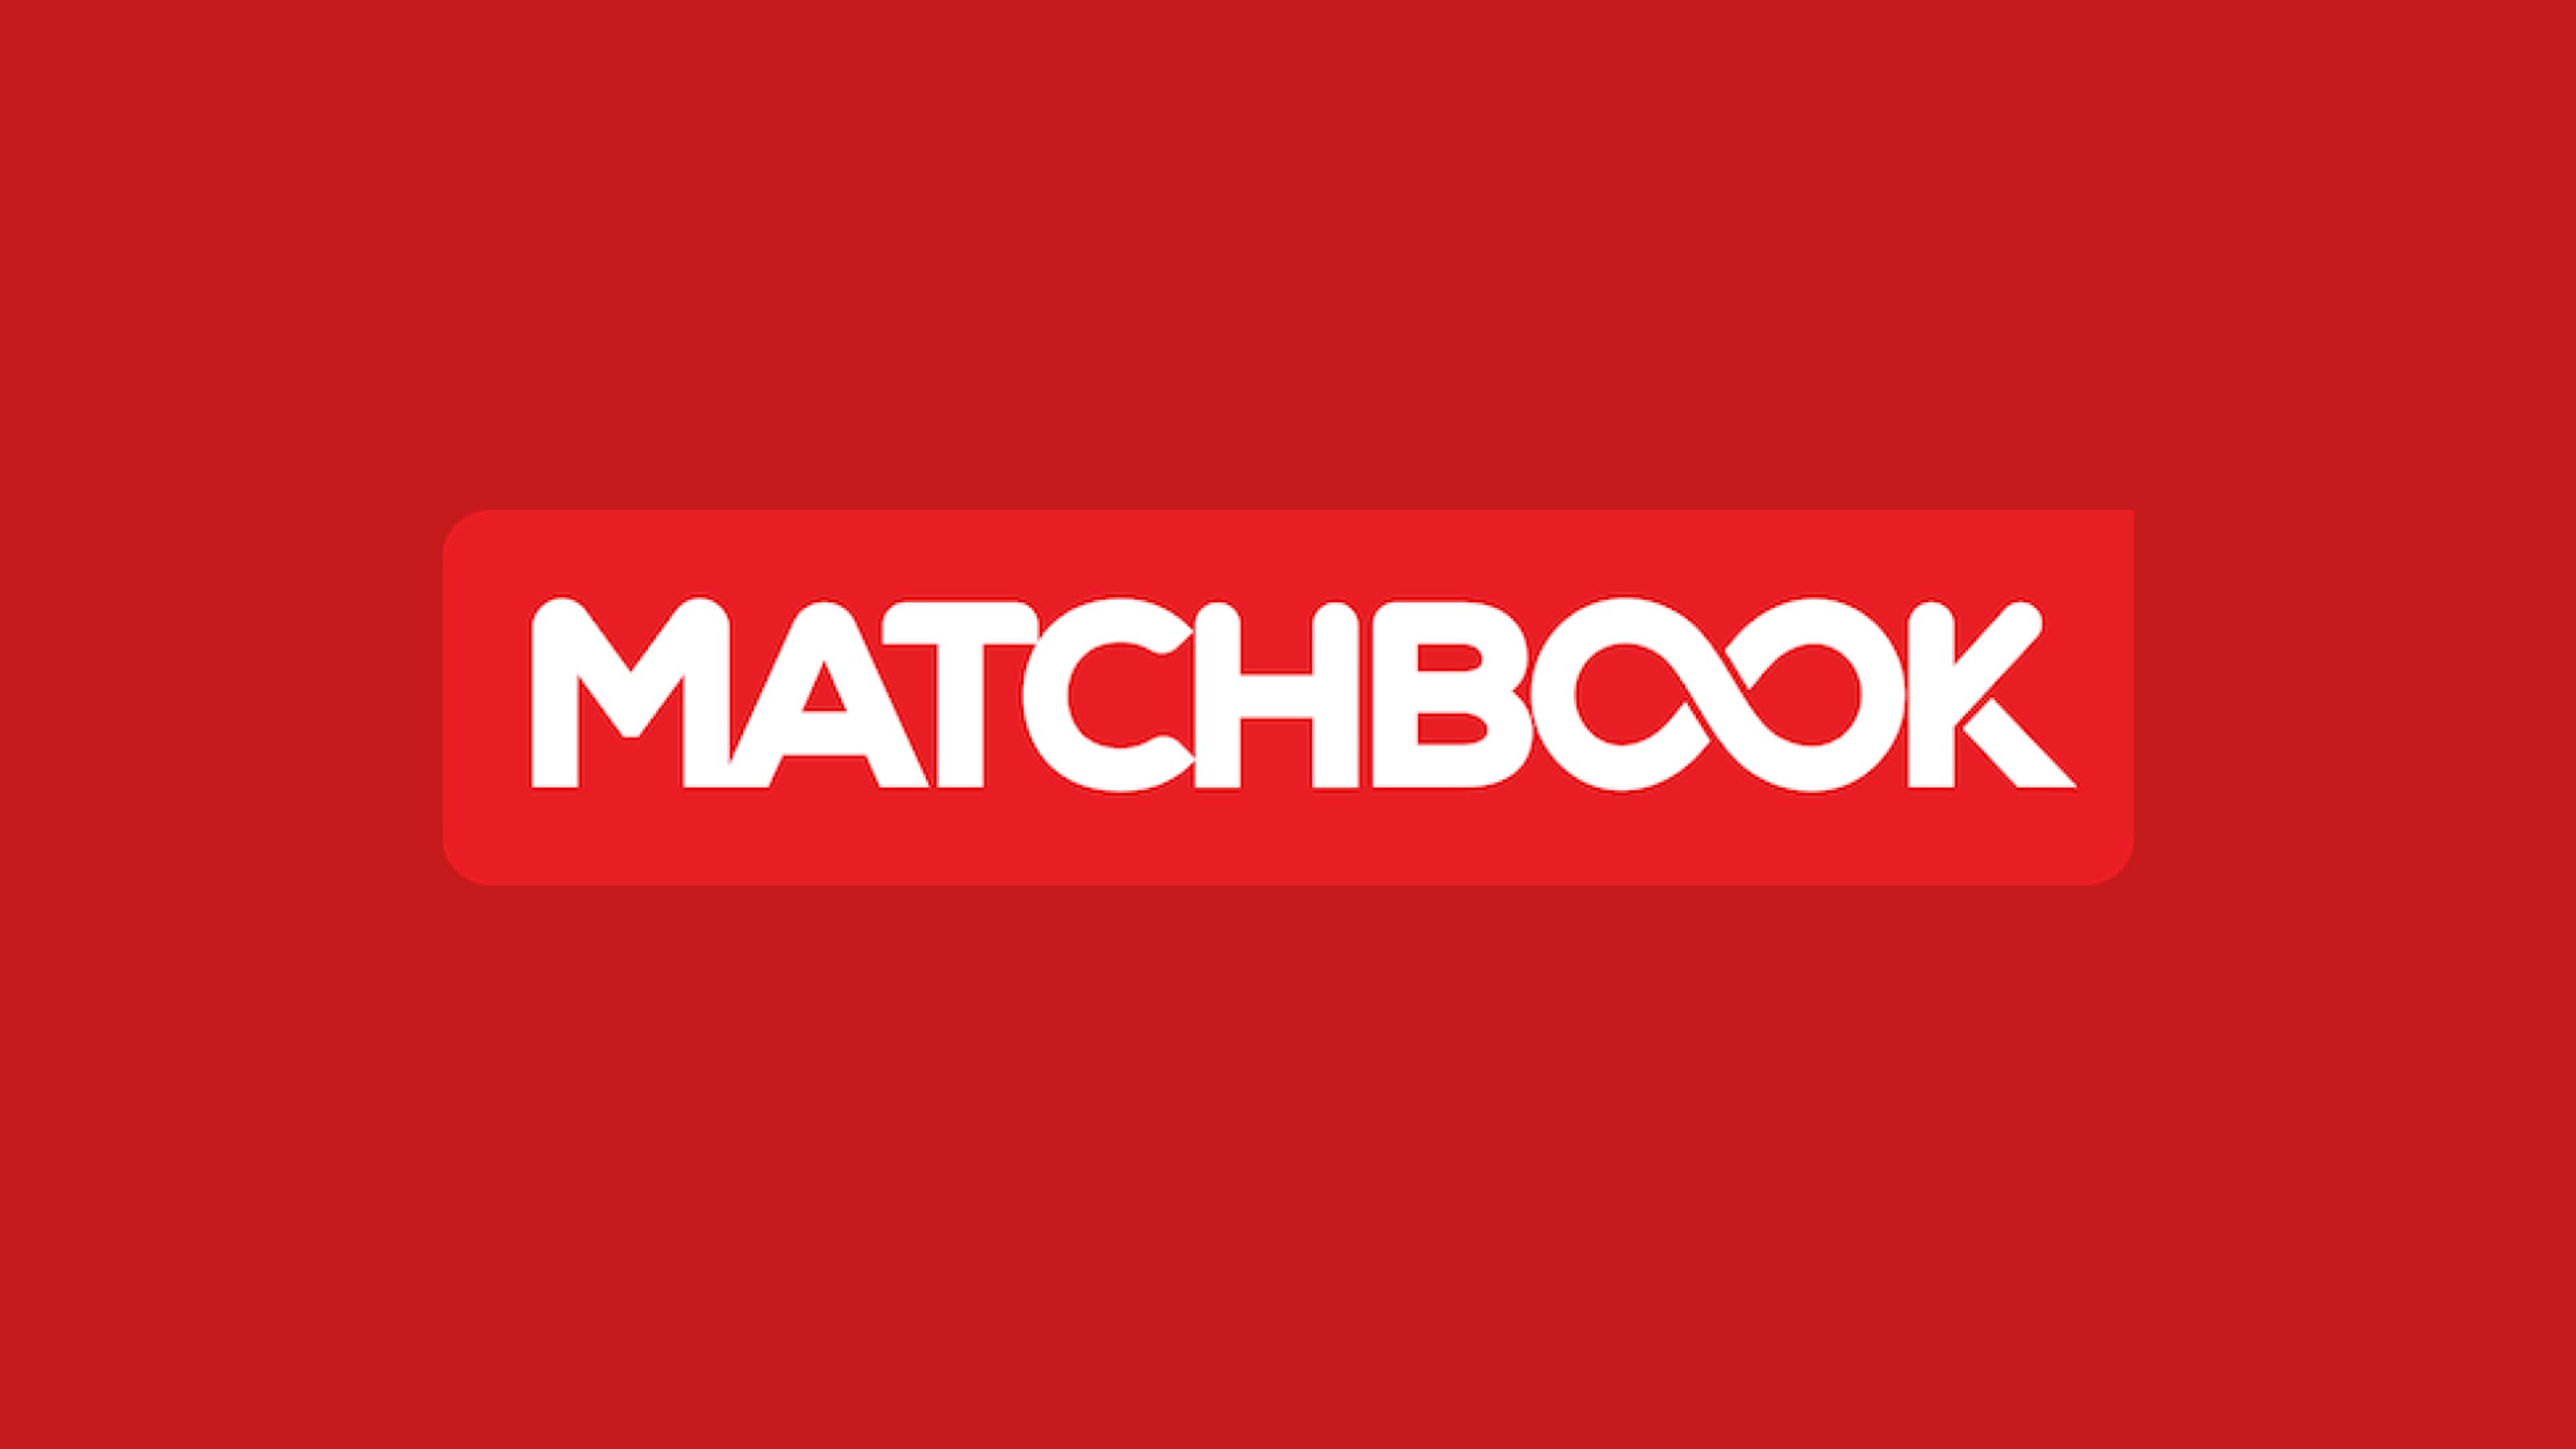 Matchbook Sign Up Offer and Promo Code